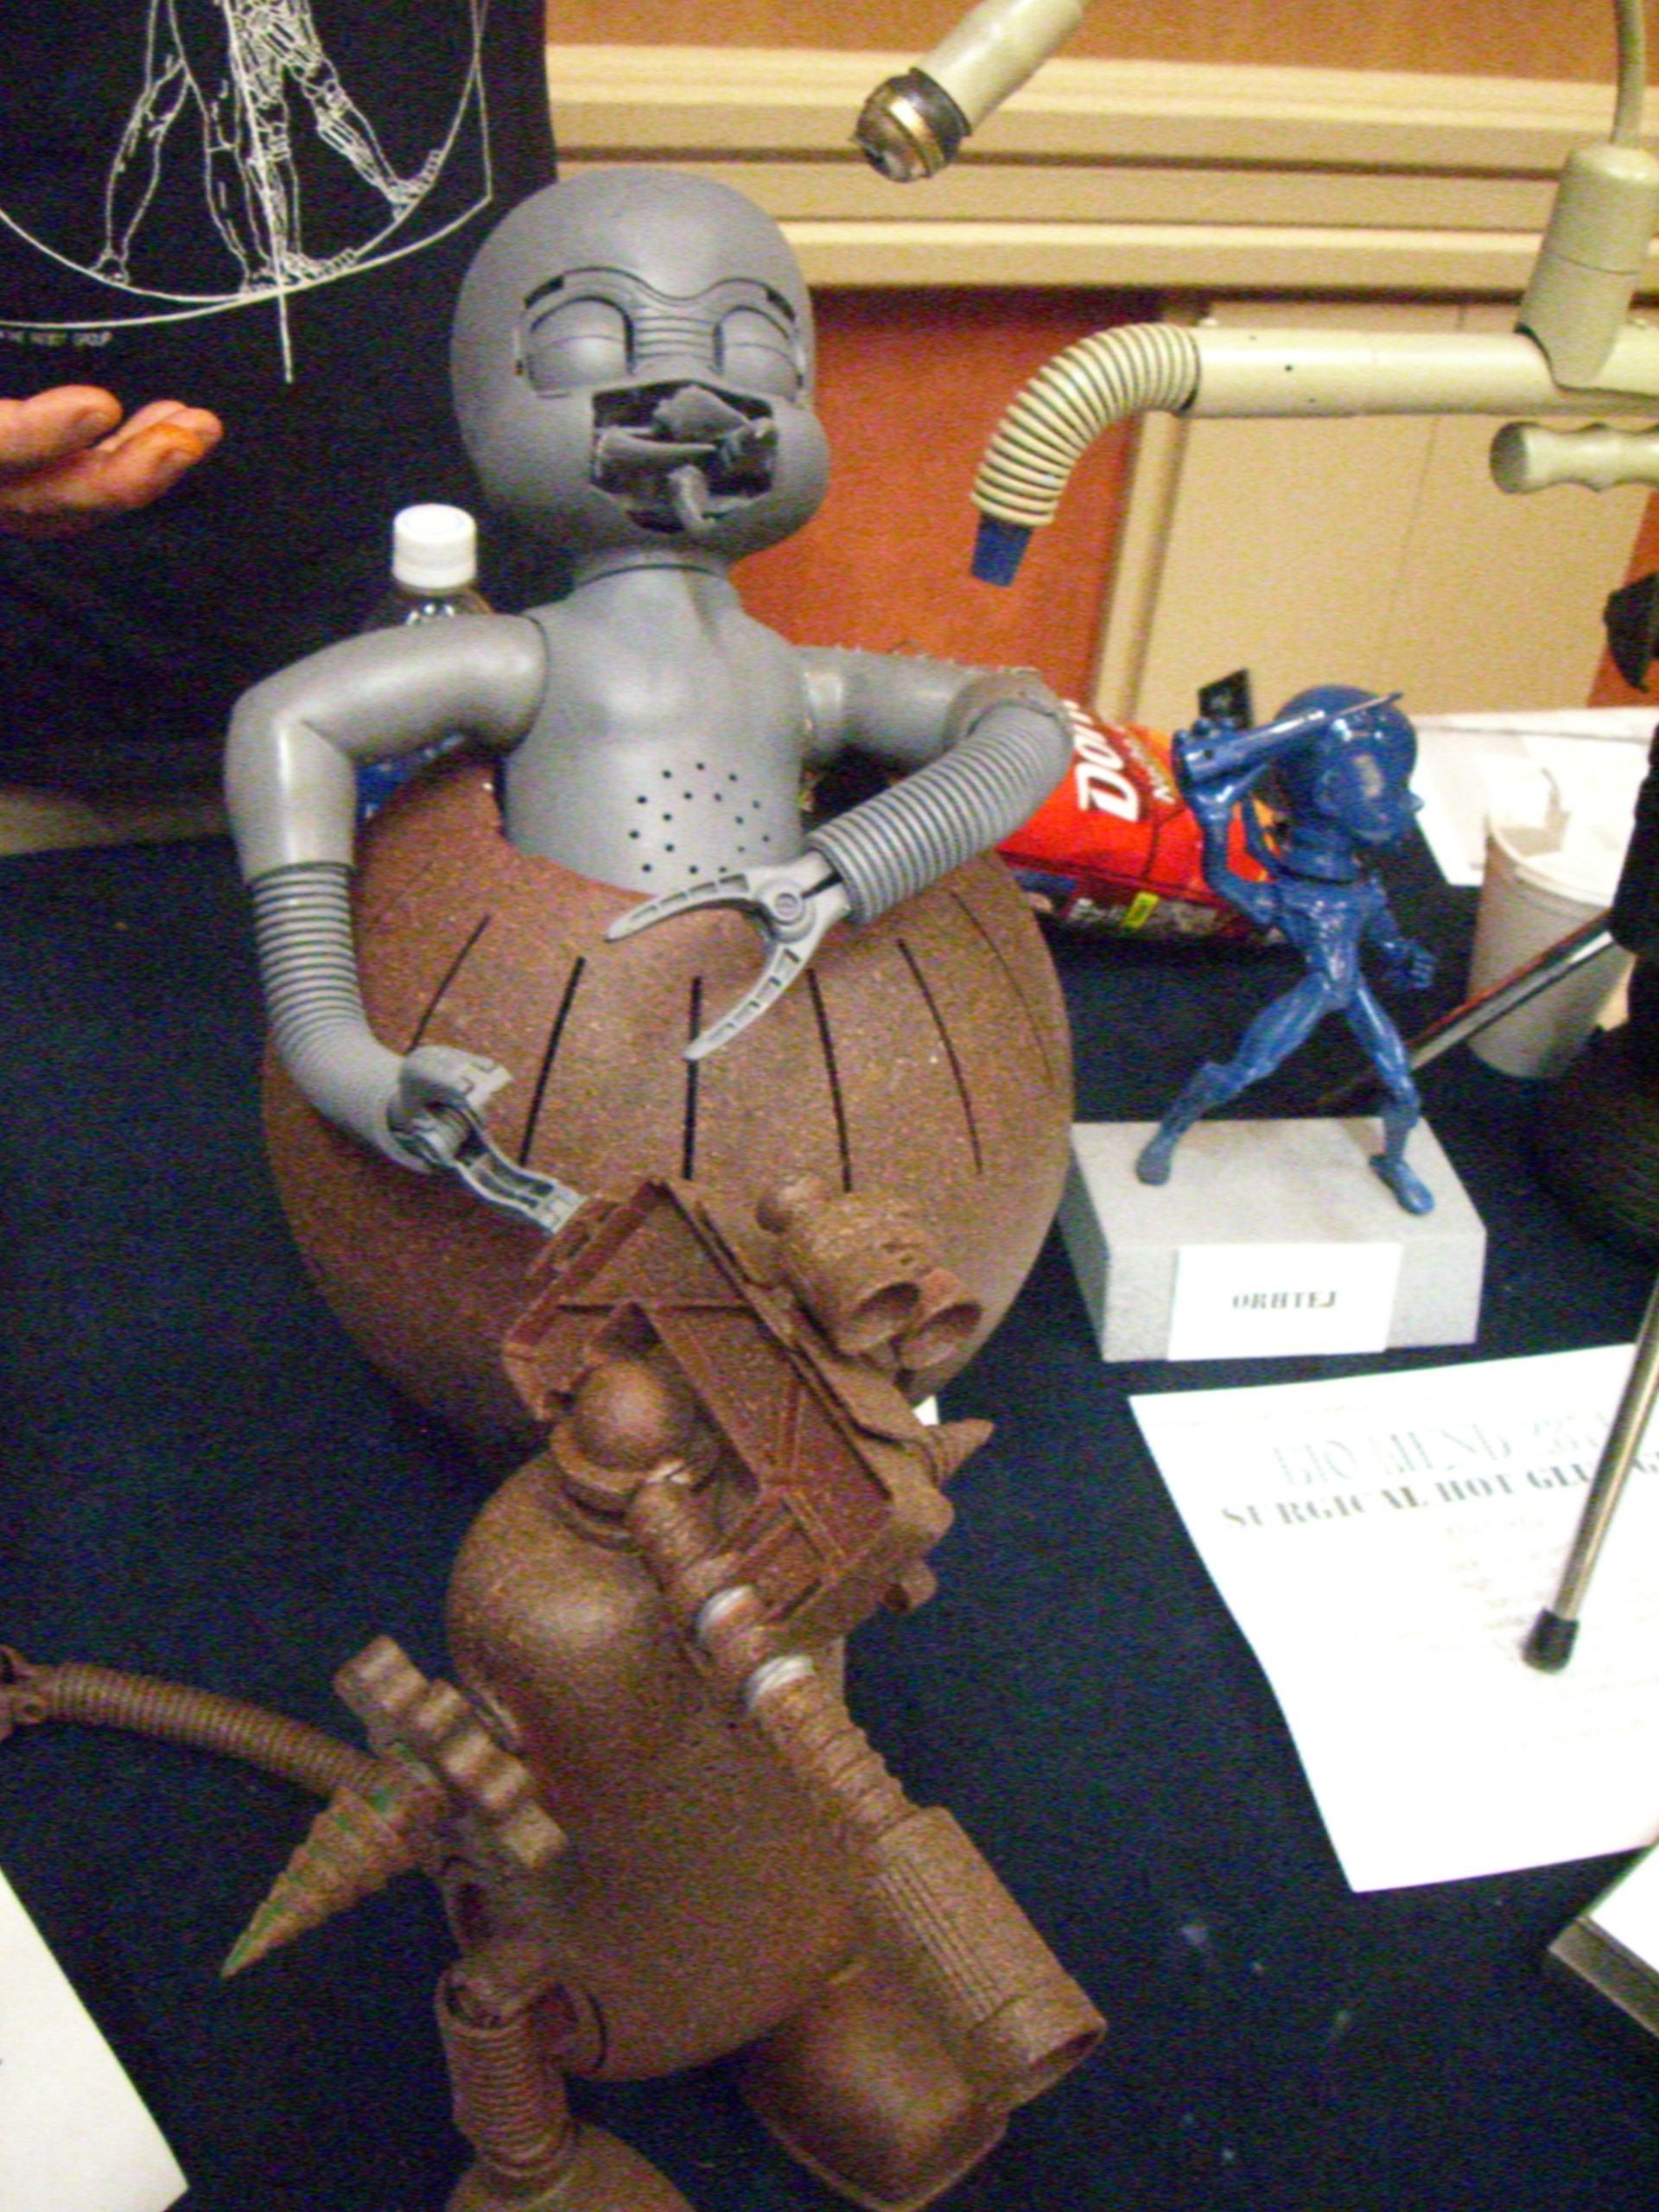 A grey alien with mouth tentacles, made by the Robot Group, at ArmadilloCon 2007